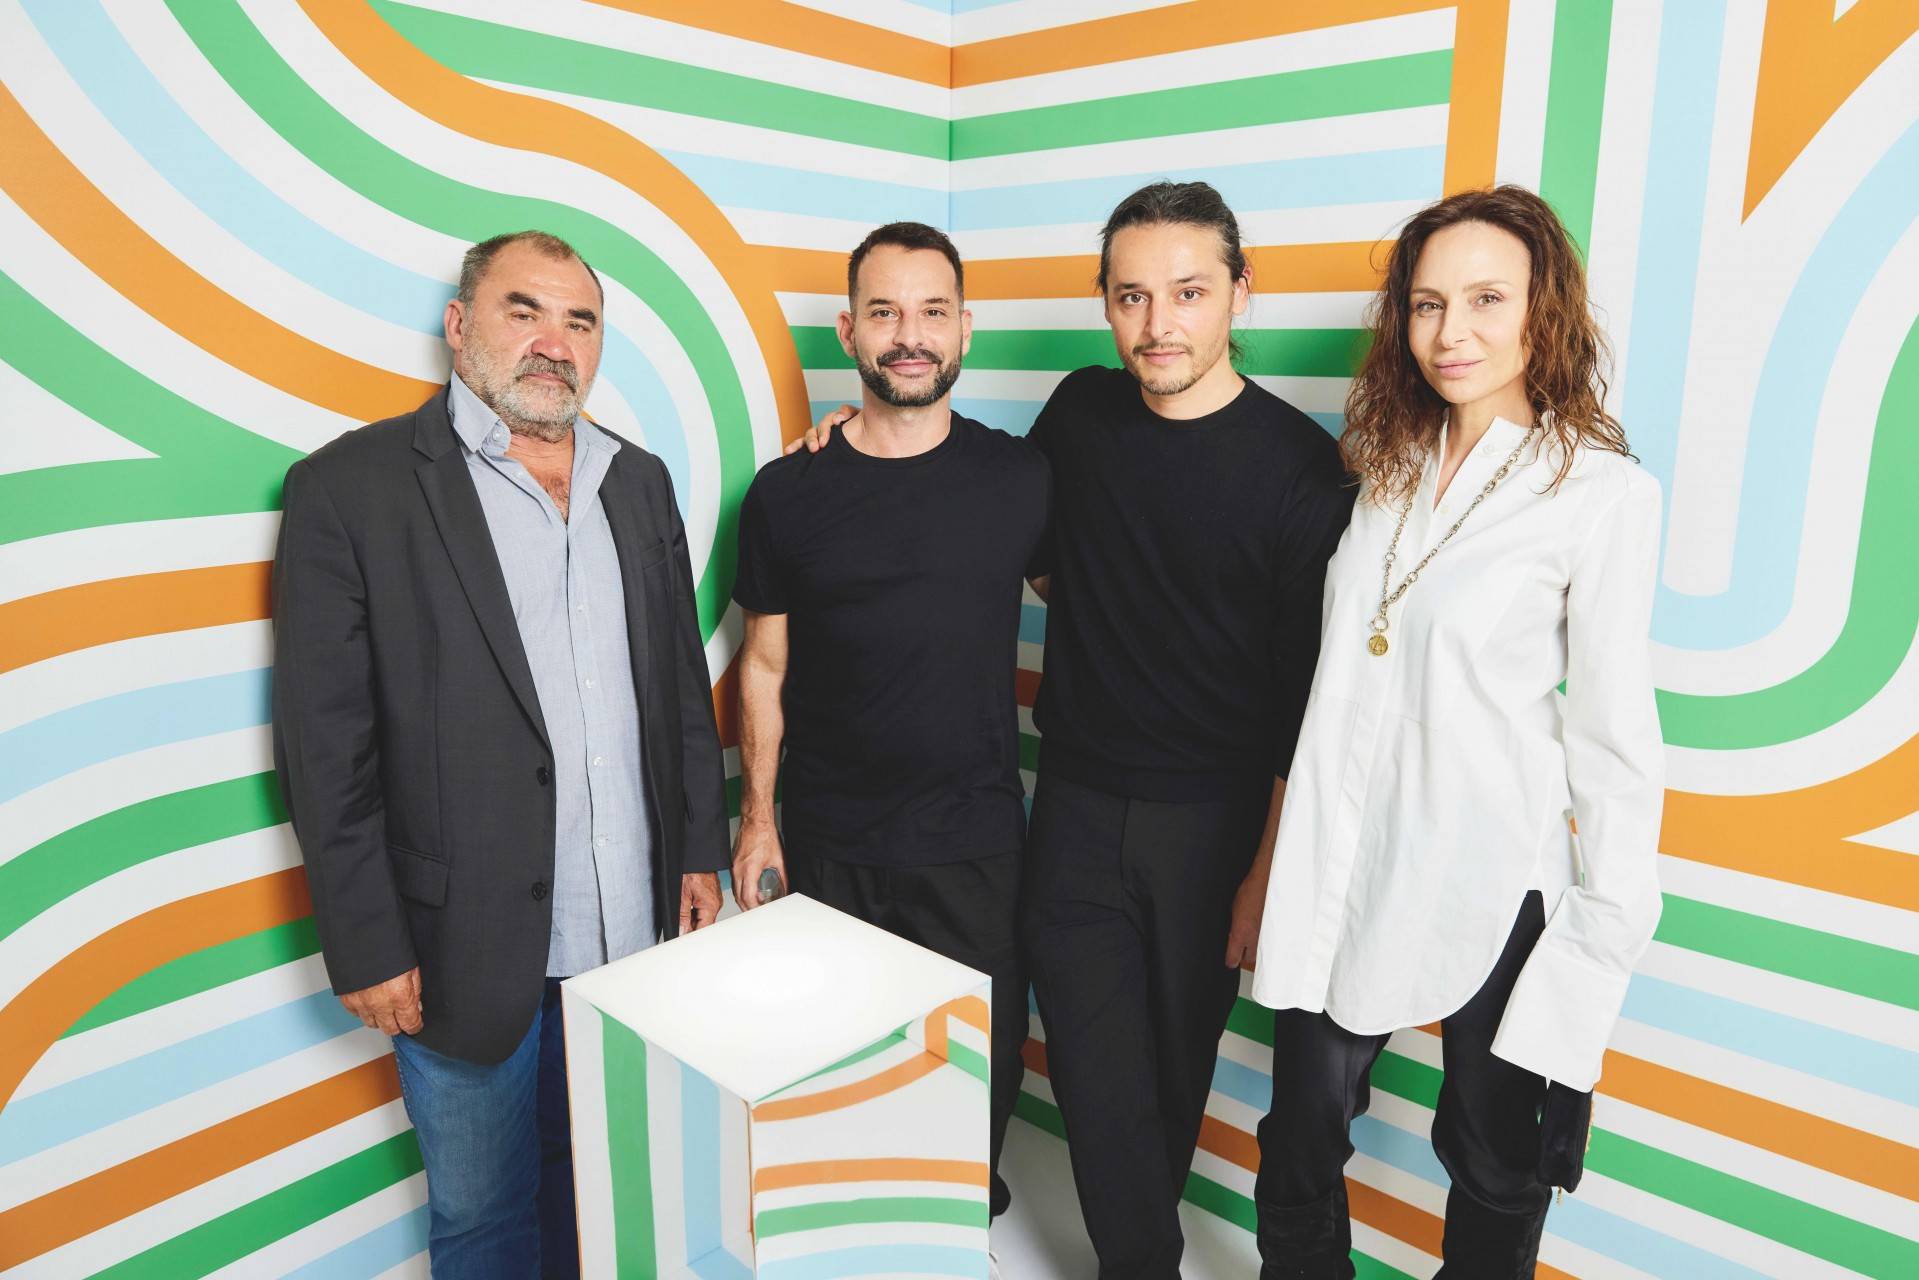 Maurice Roucel, Stéphane Subrenat, Olivier Theyskens et Laetitia Crahay